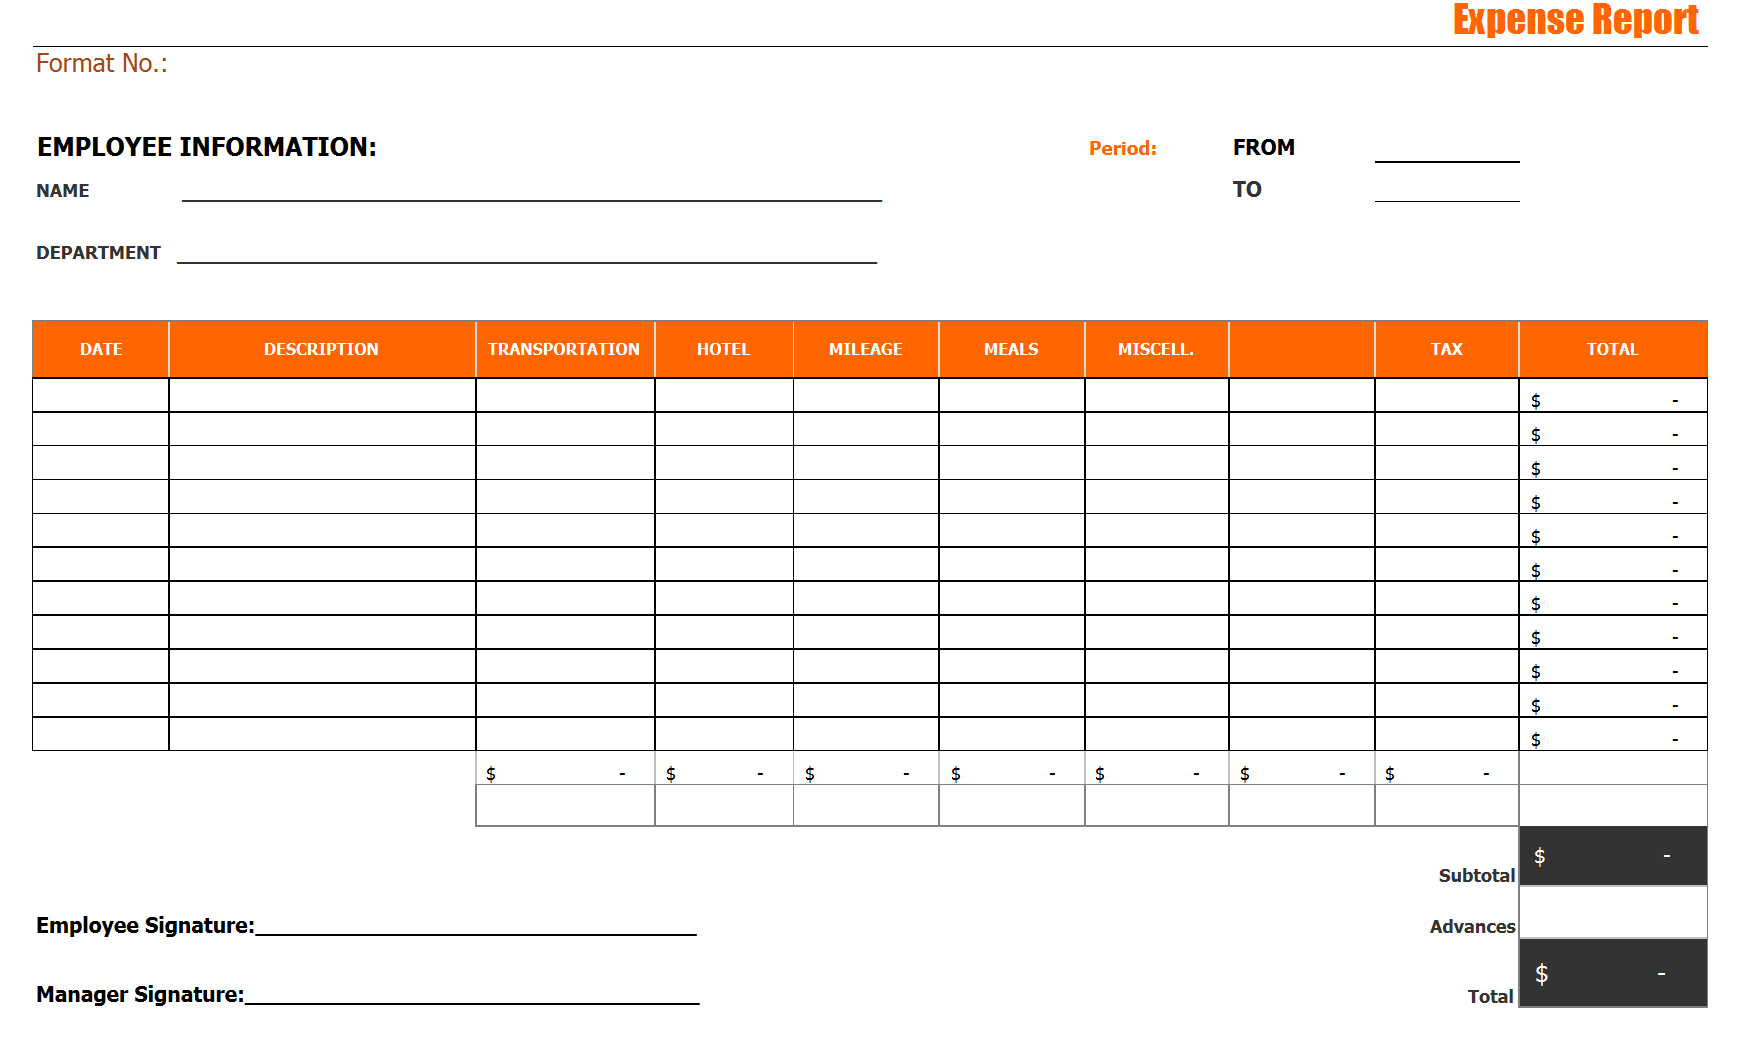 Expense Report – Within Company Expense Report Template